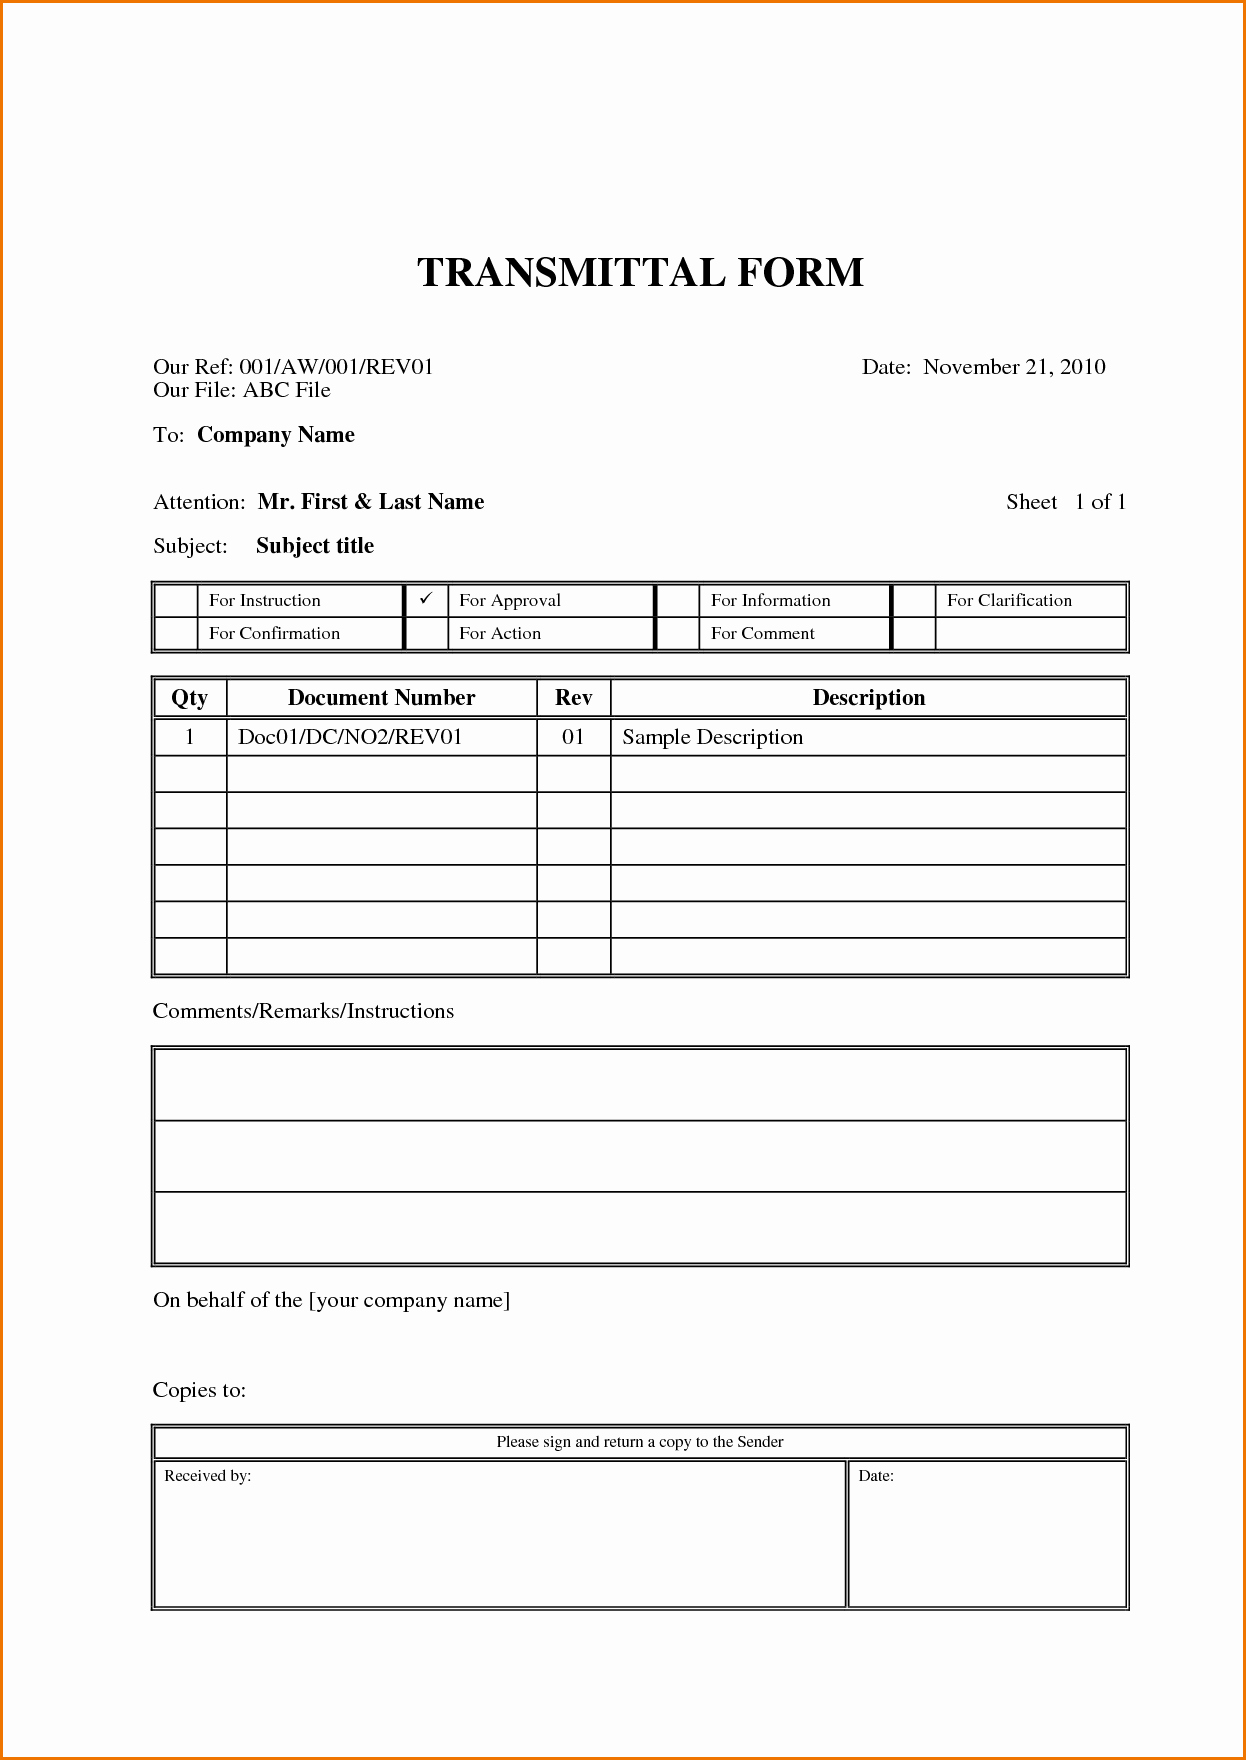 List Of Synonyms and Antonyms Of the Word Transmittal